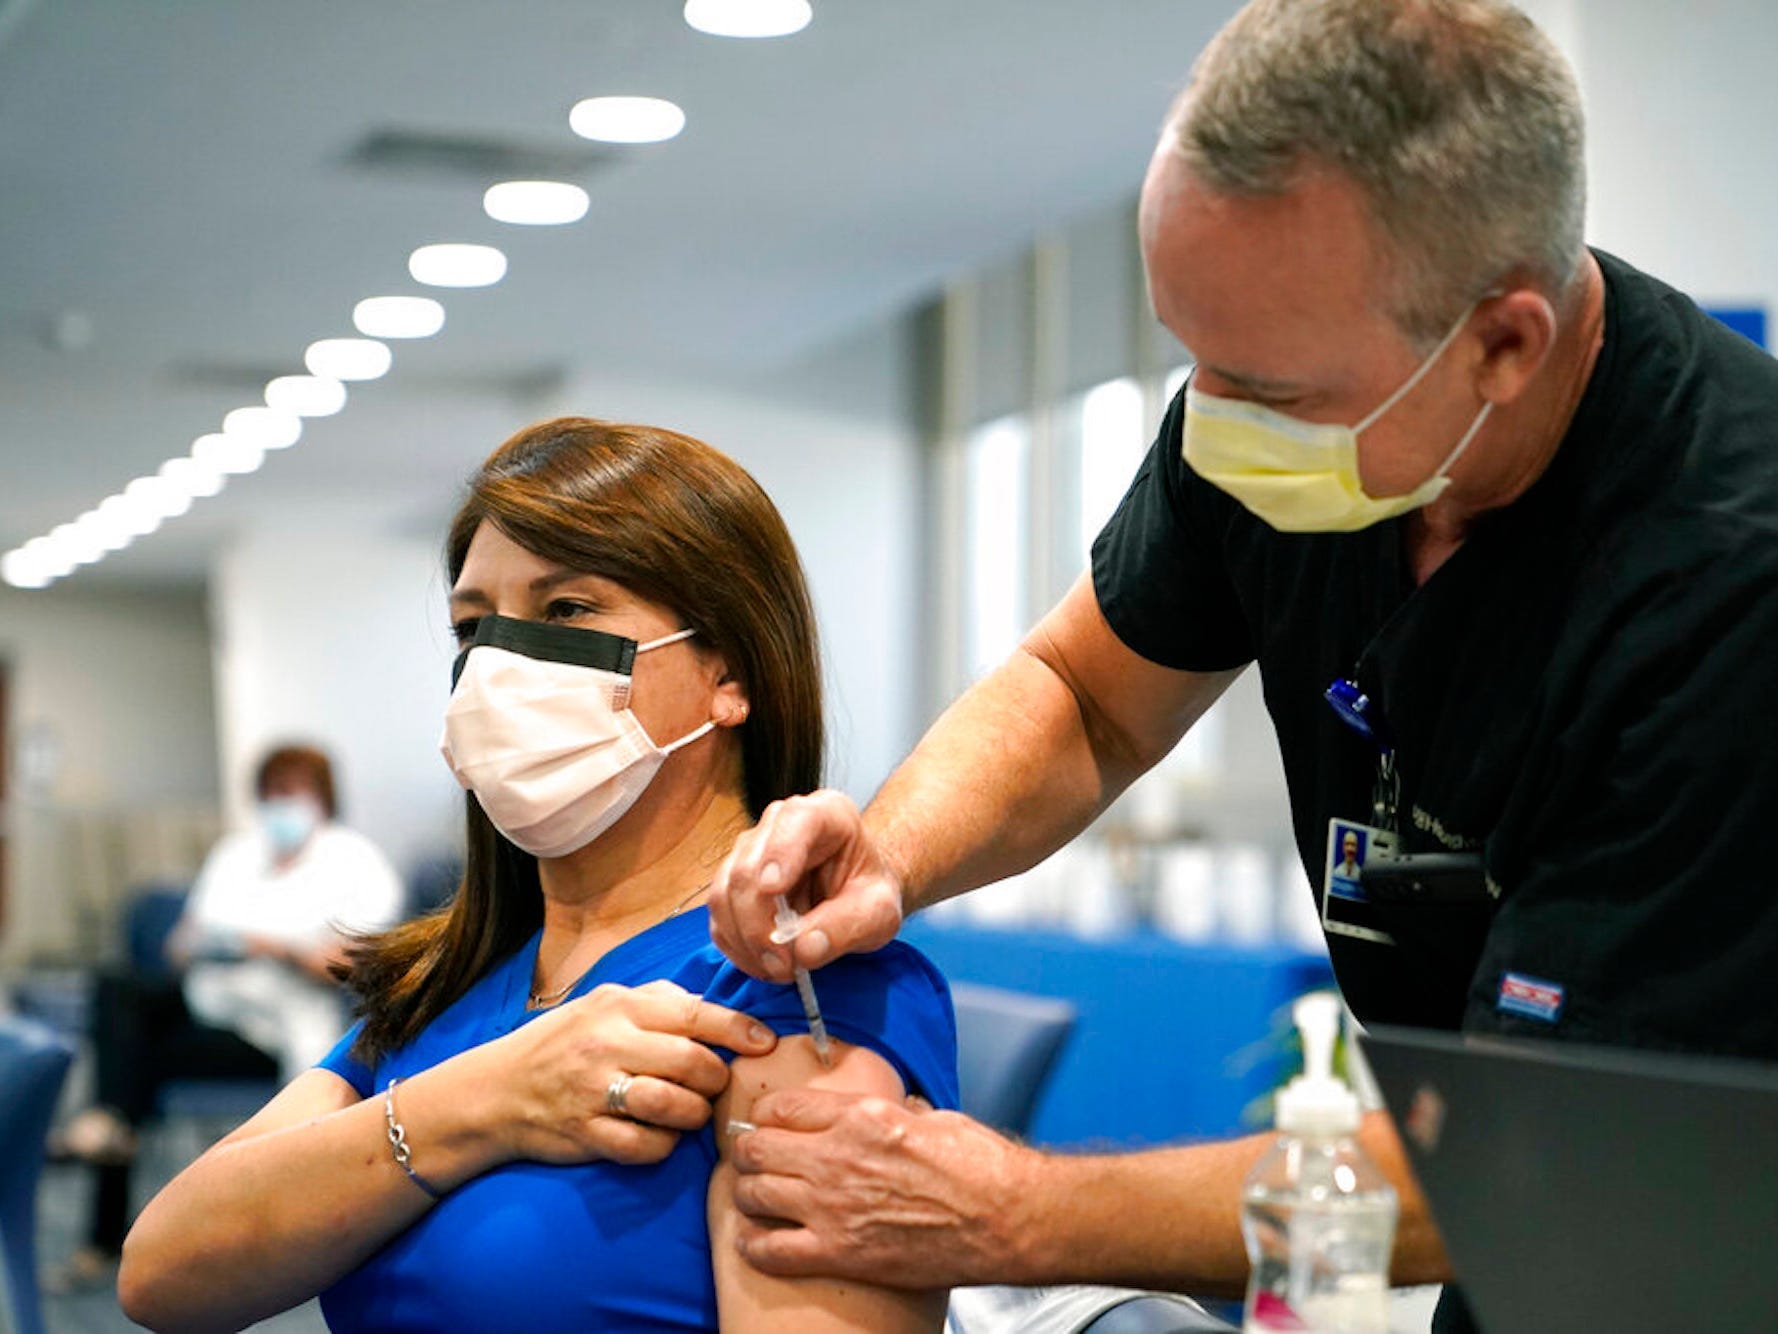 A woman wearing a mask and blue scrubs gets a shot in a clinic.